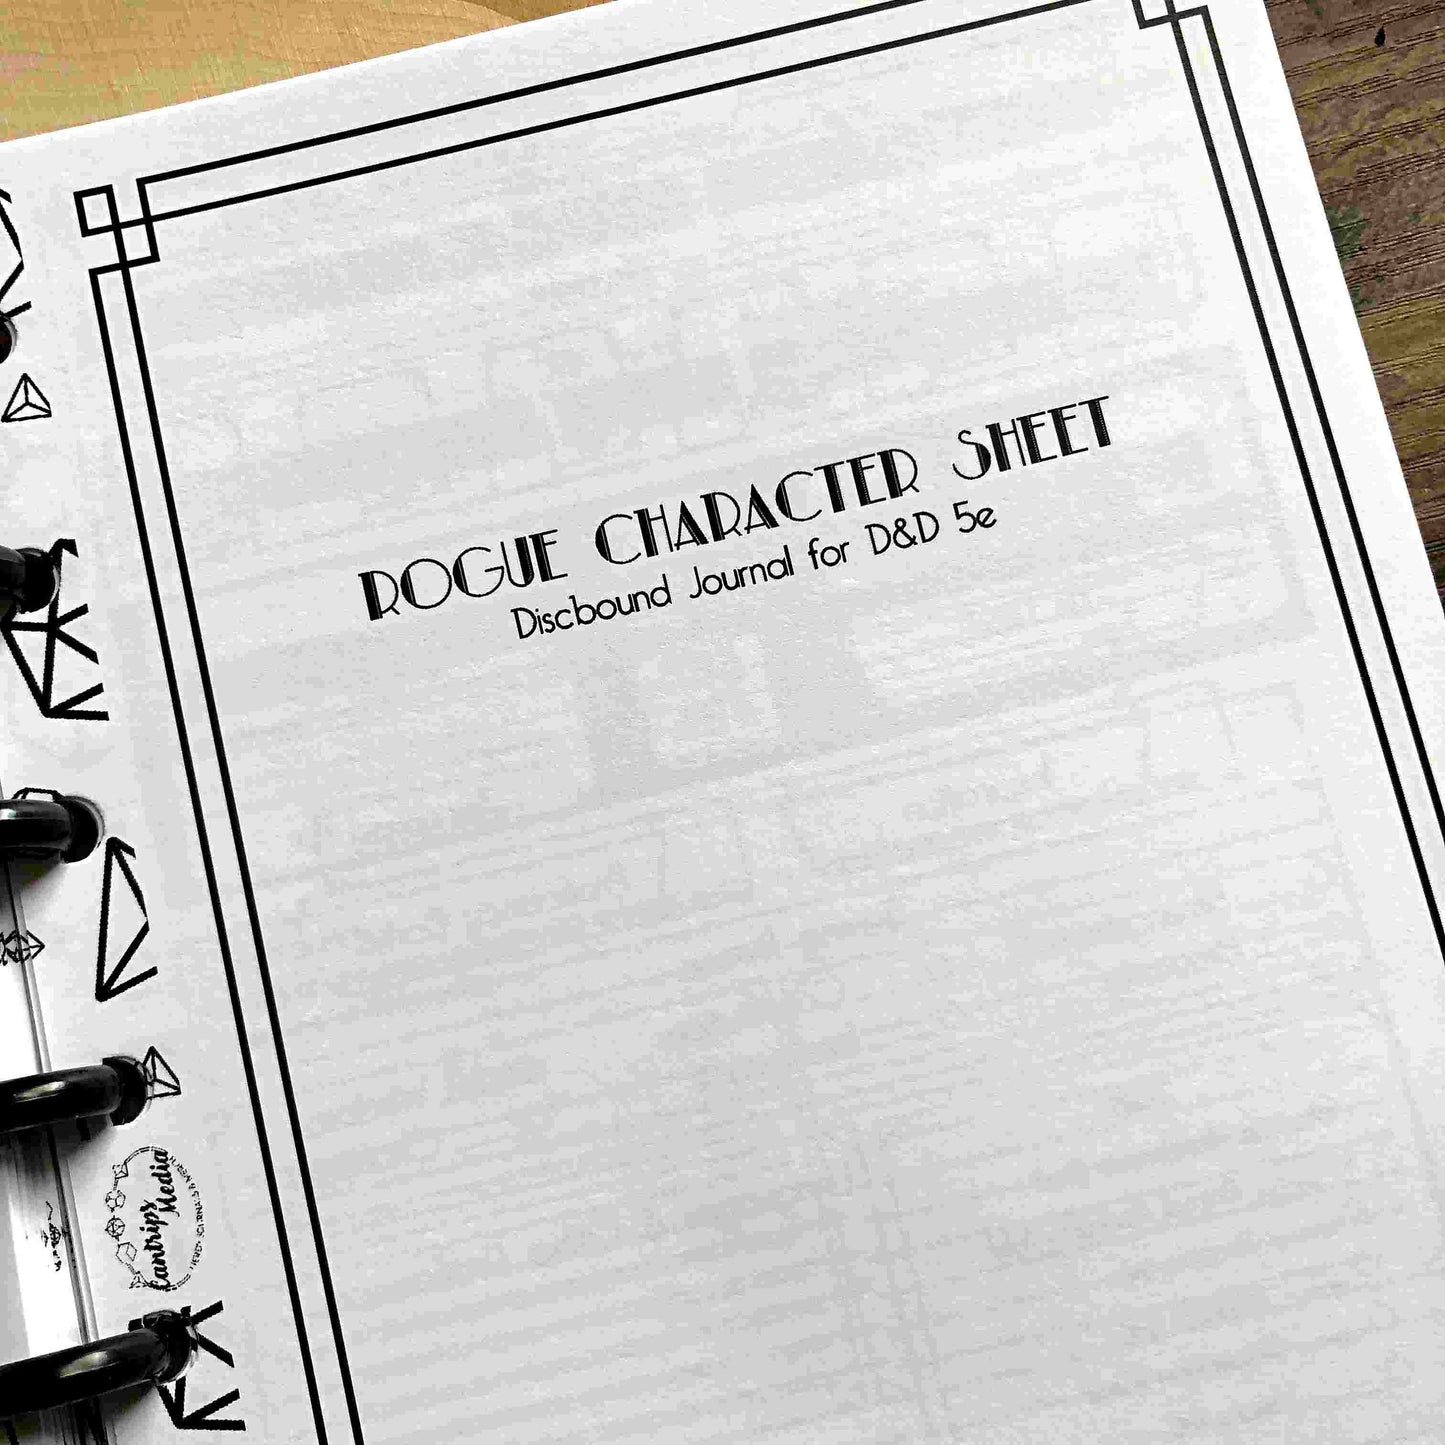 Rogue Character Sheets Page Pack (Art Deco Version)